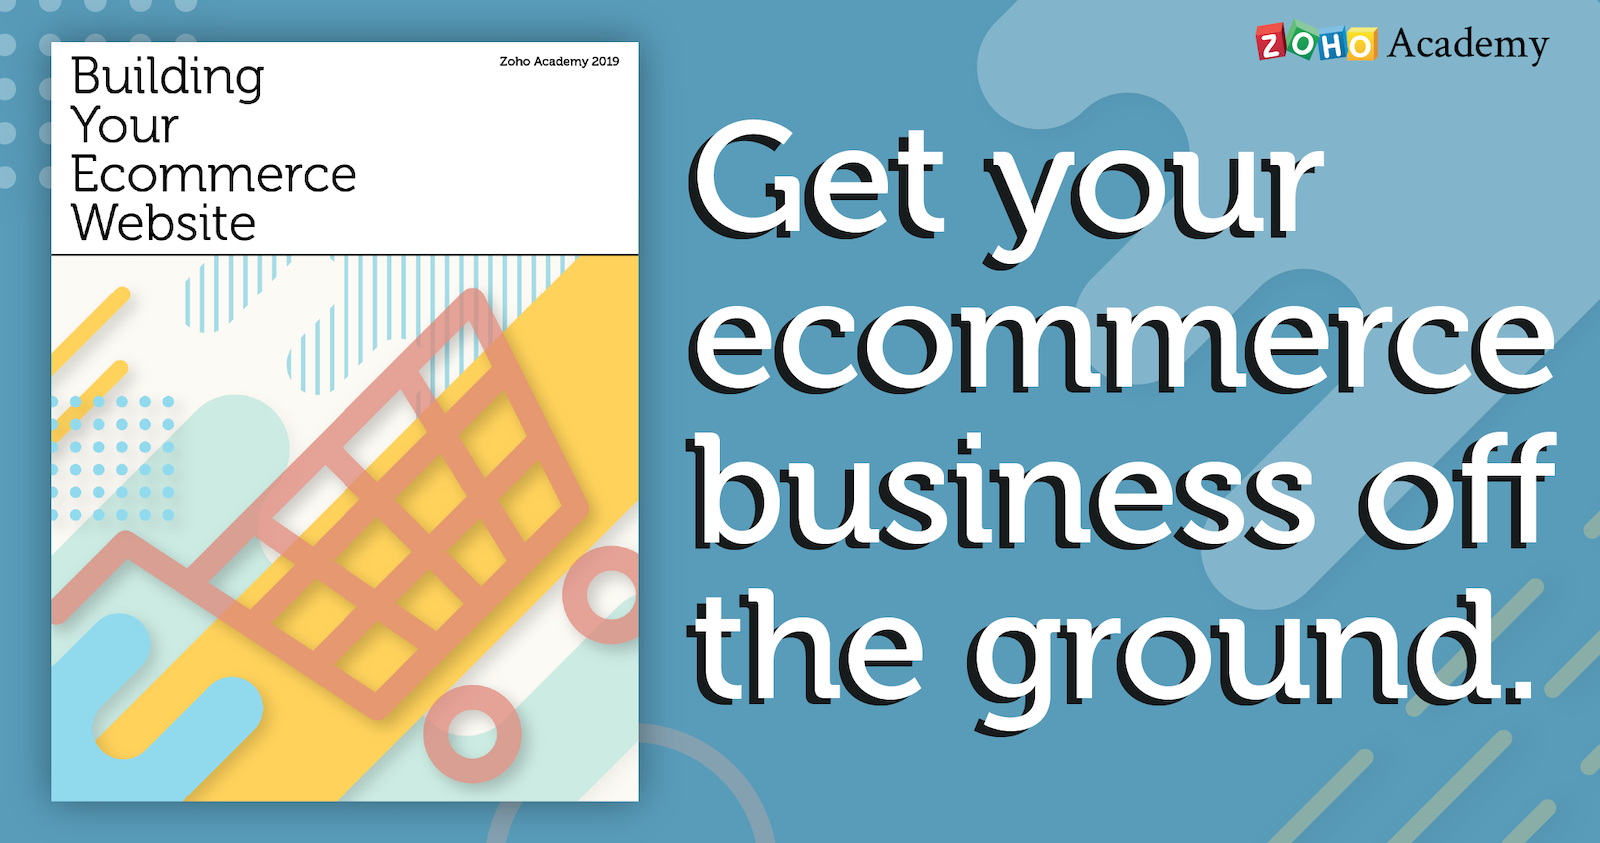 Zoho Academy Wants to Help You Get Your Ecommerce Site Up and Running